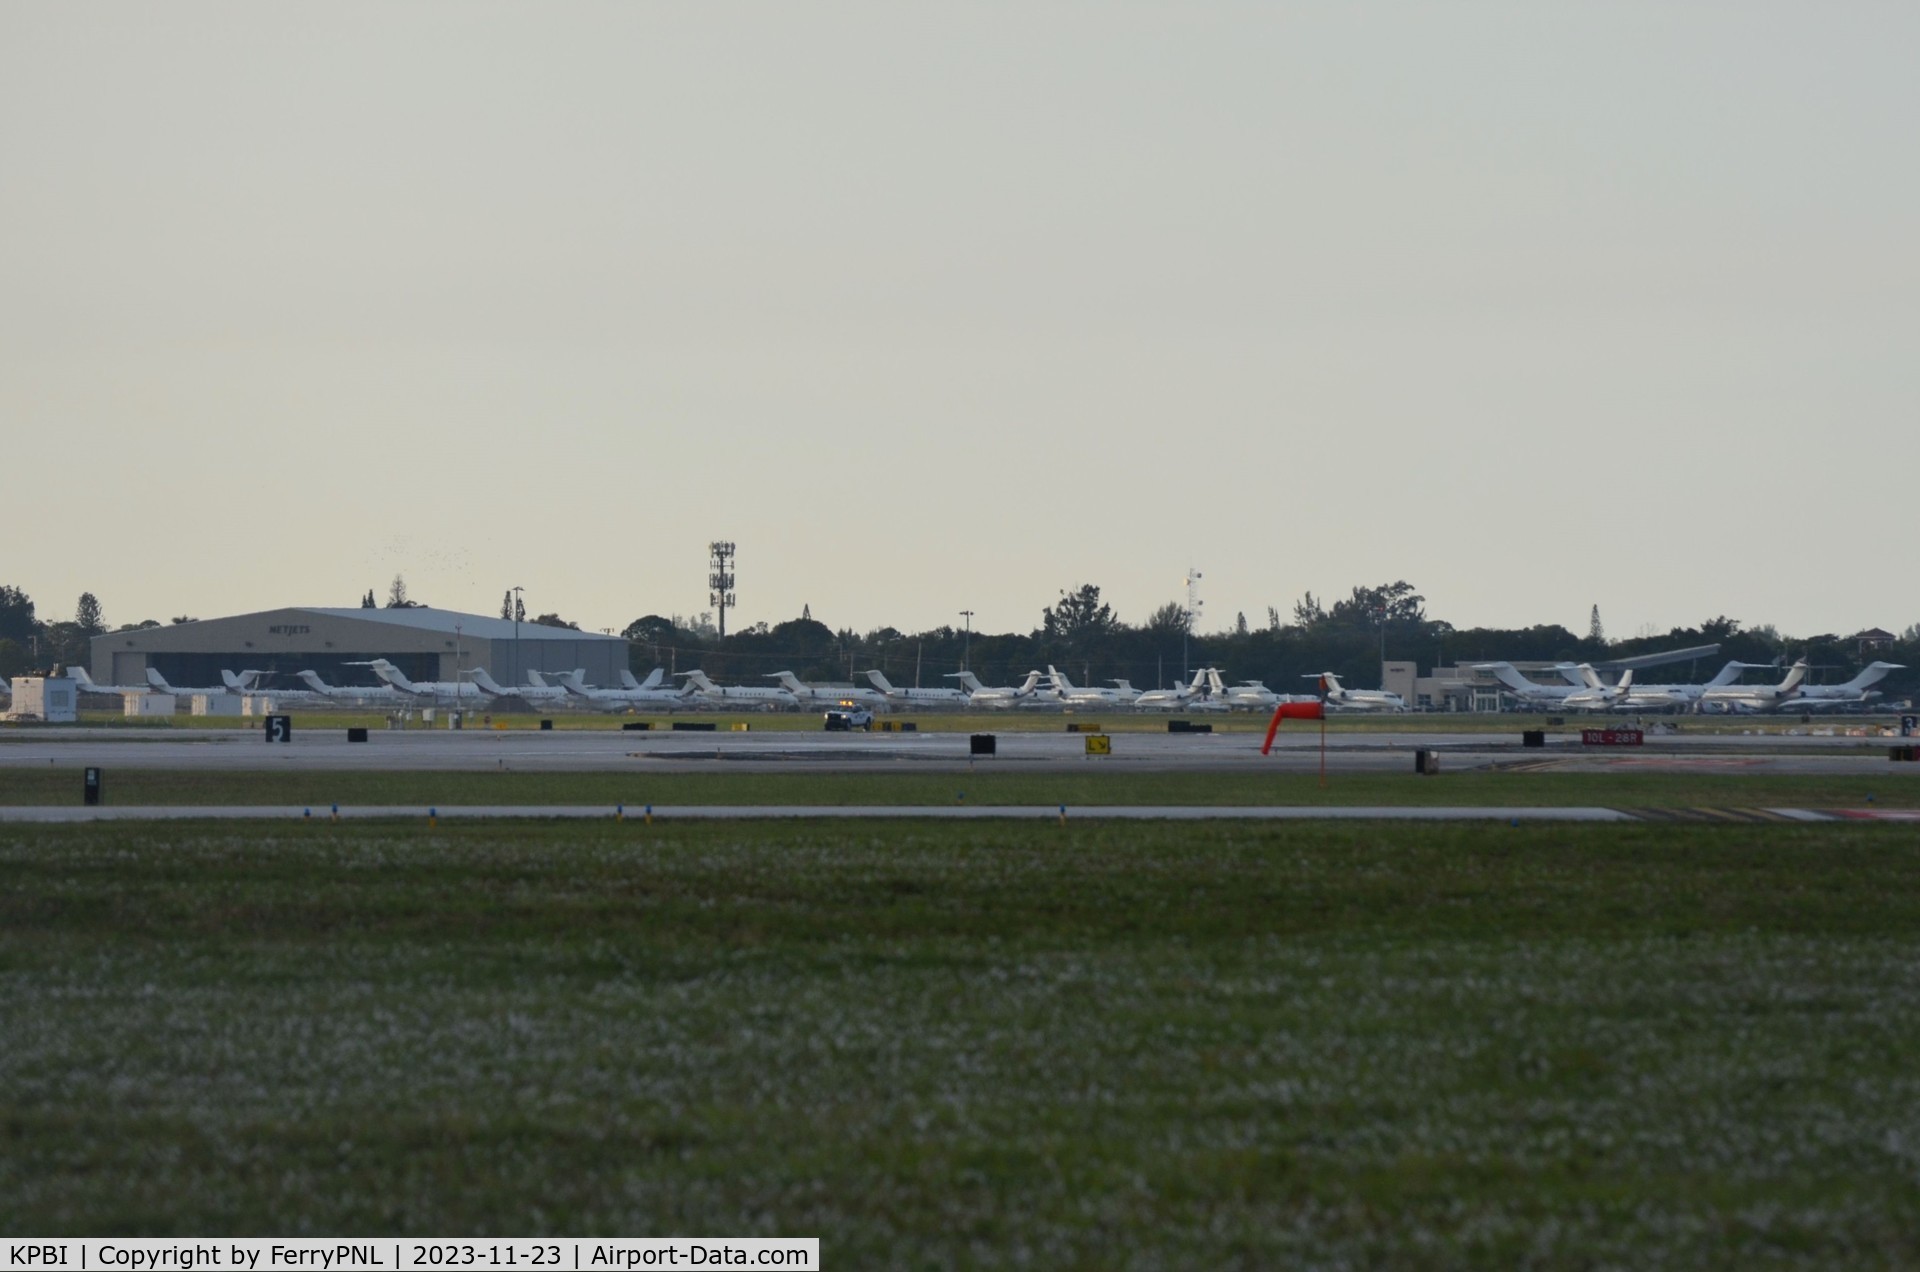 Palm Beach International Airport (PBI) - View towards the Netjets area in PBI with over 35+ planes visible